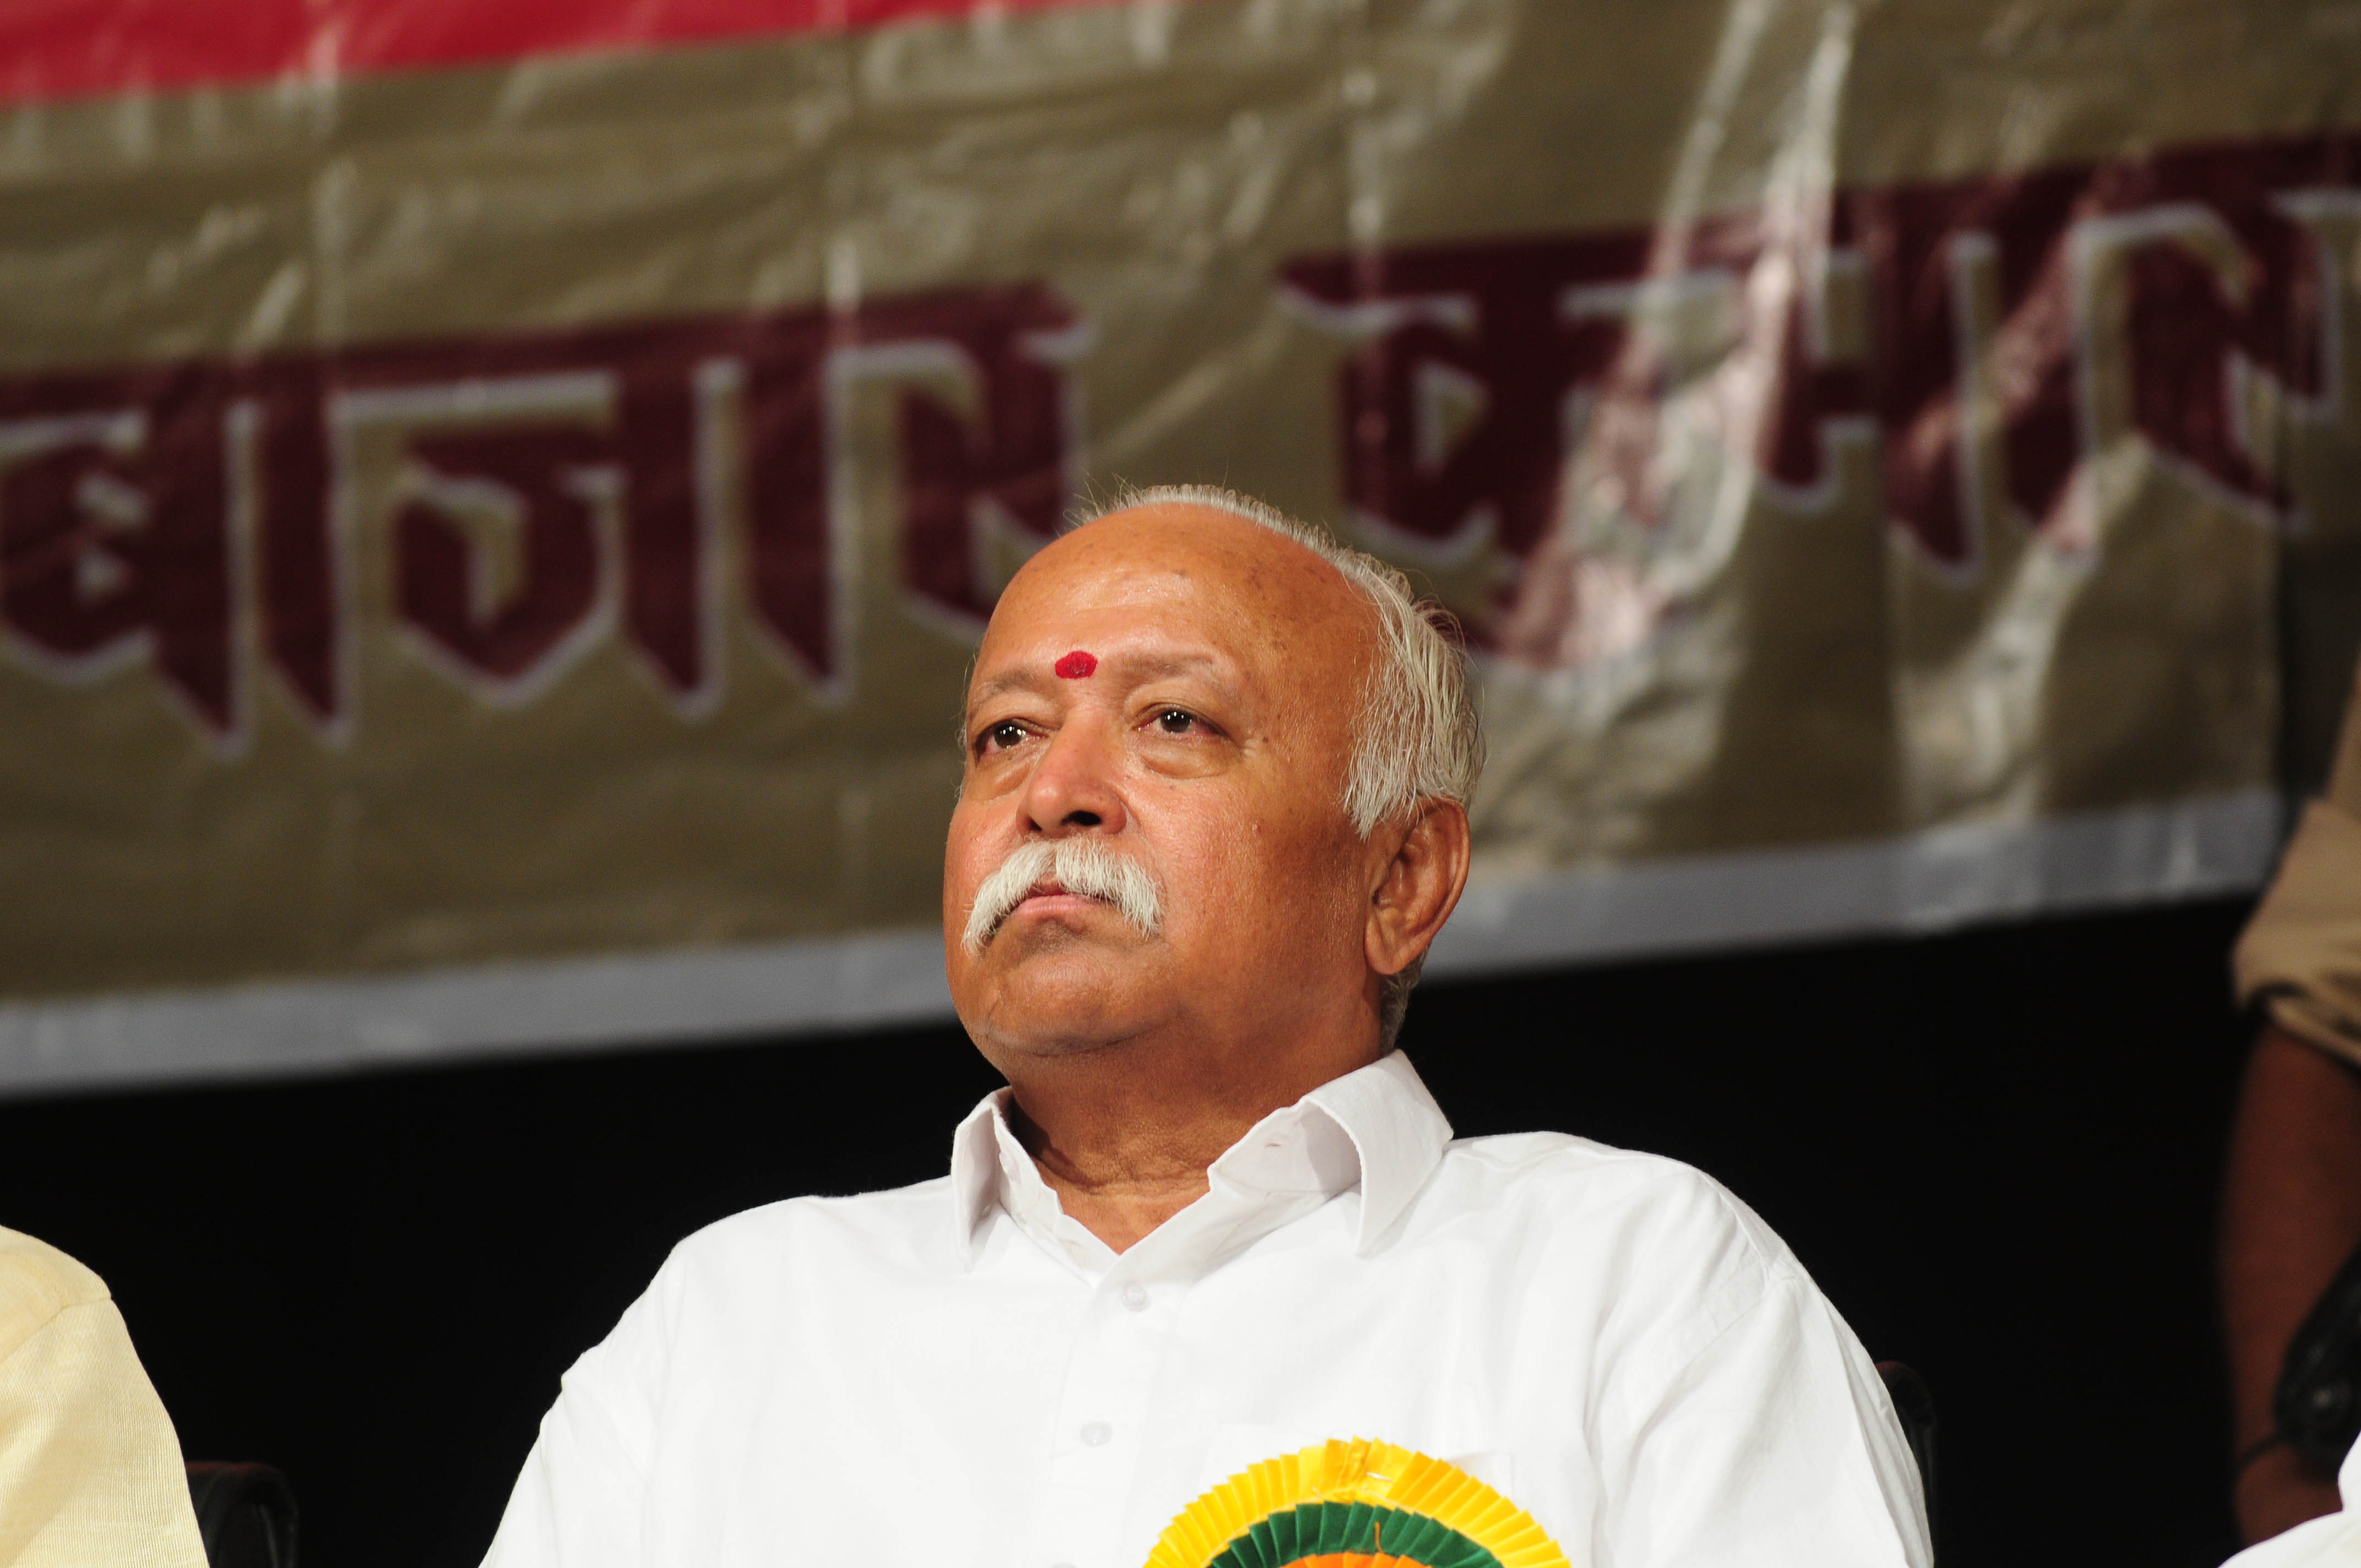 RSS chief Mohan Bhagwat at a gathering in Kolkata on April 1, 2015 (Indranil Bhoumik—Livemint/Getty Images)